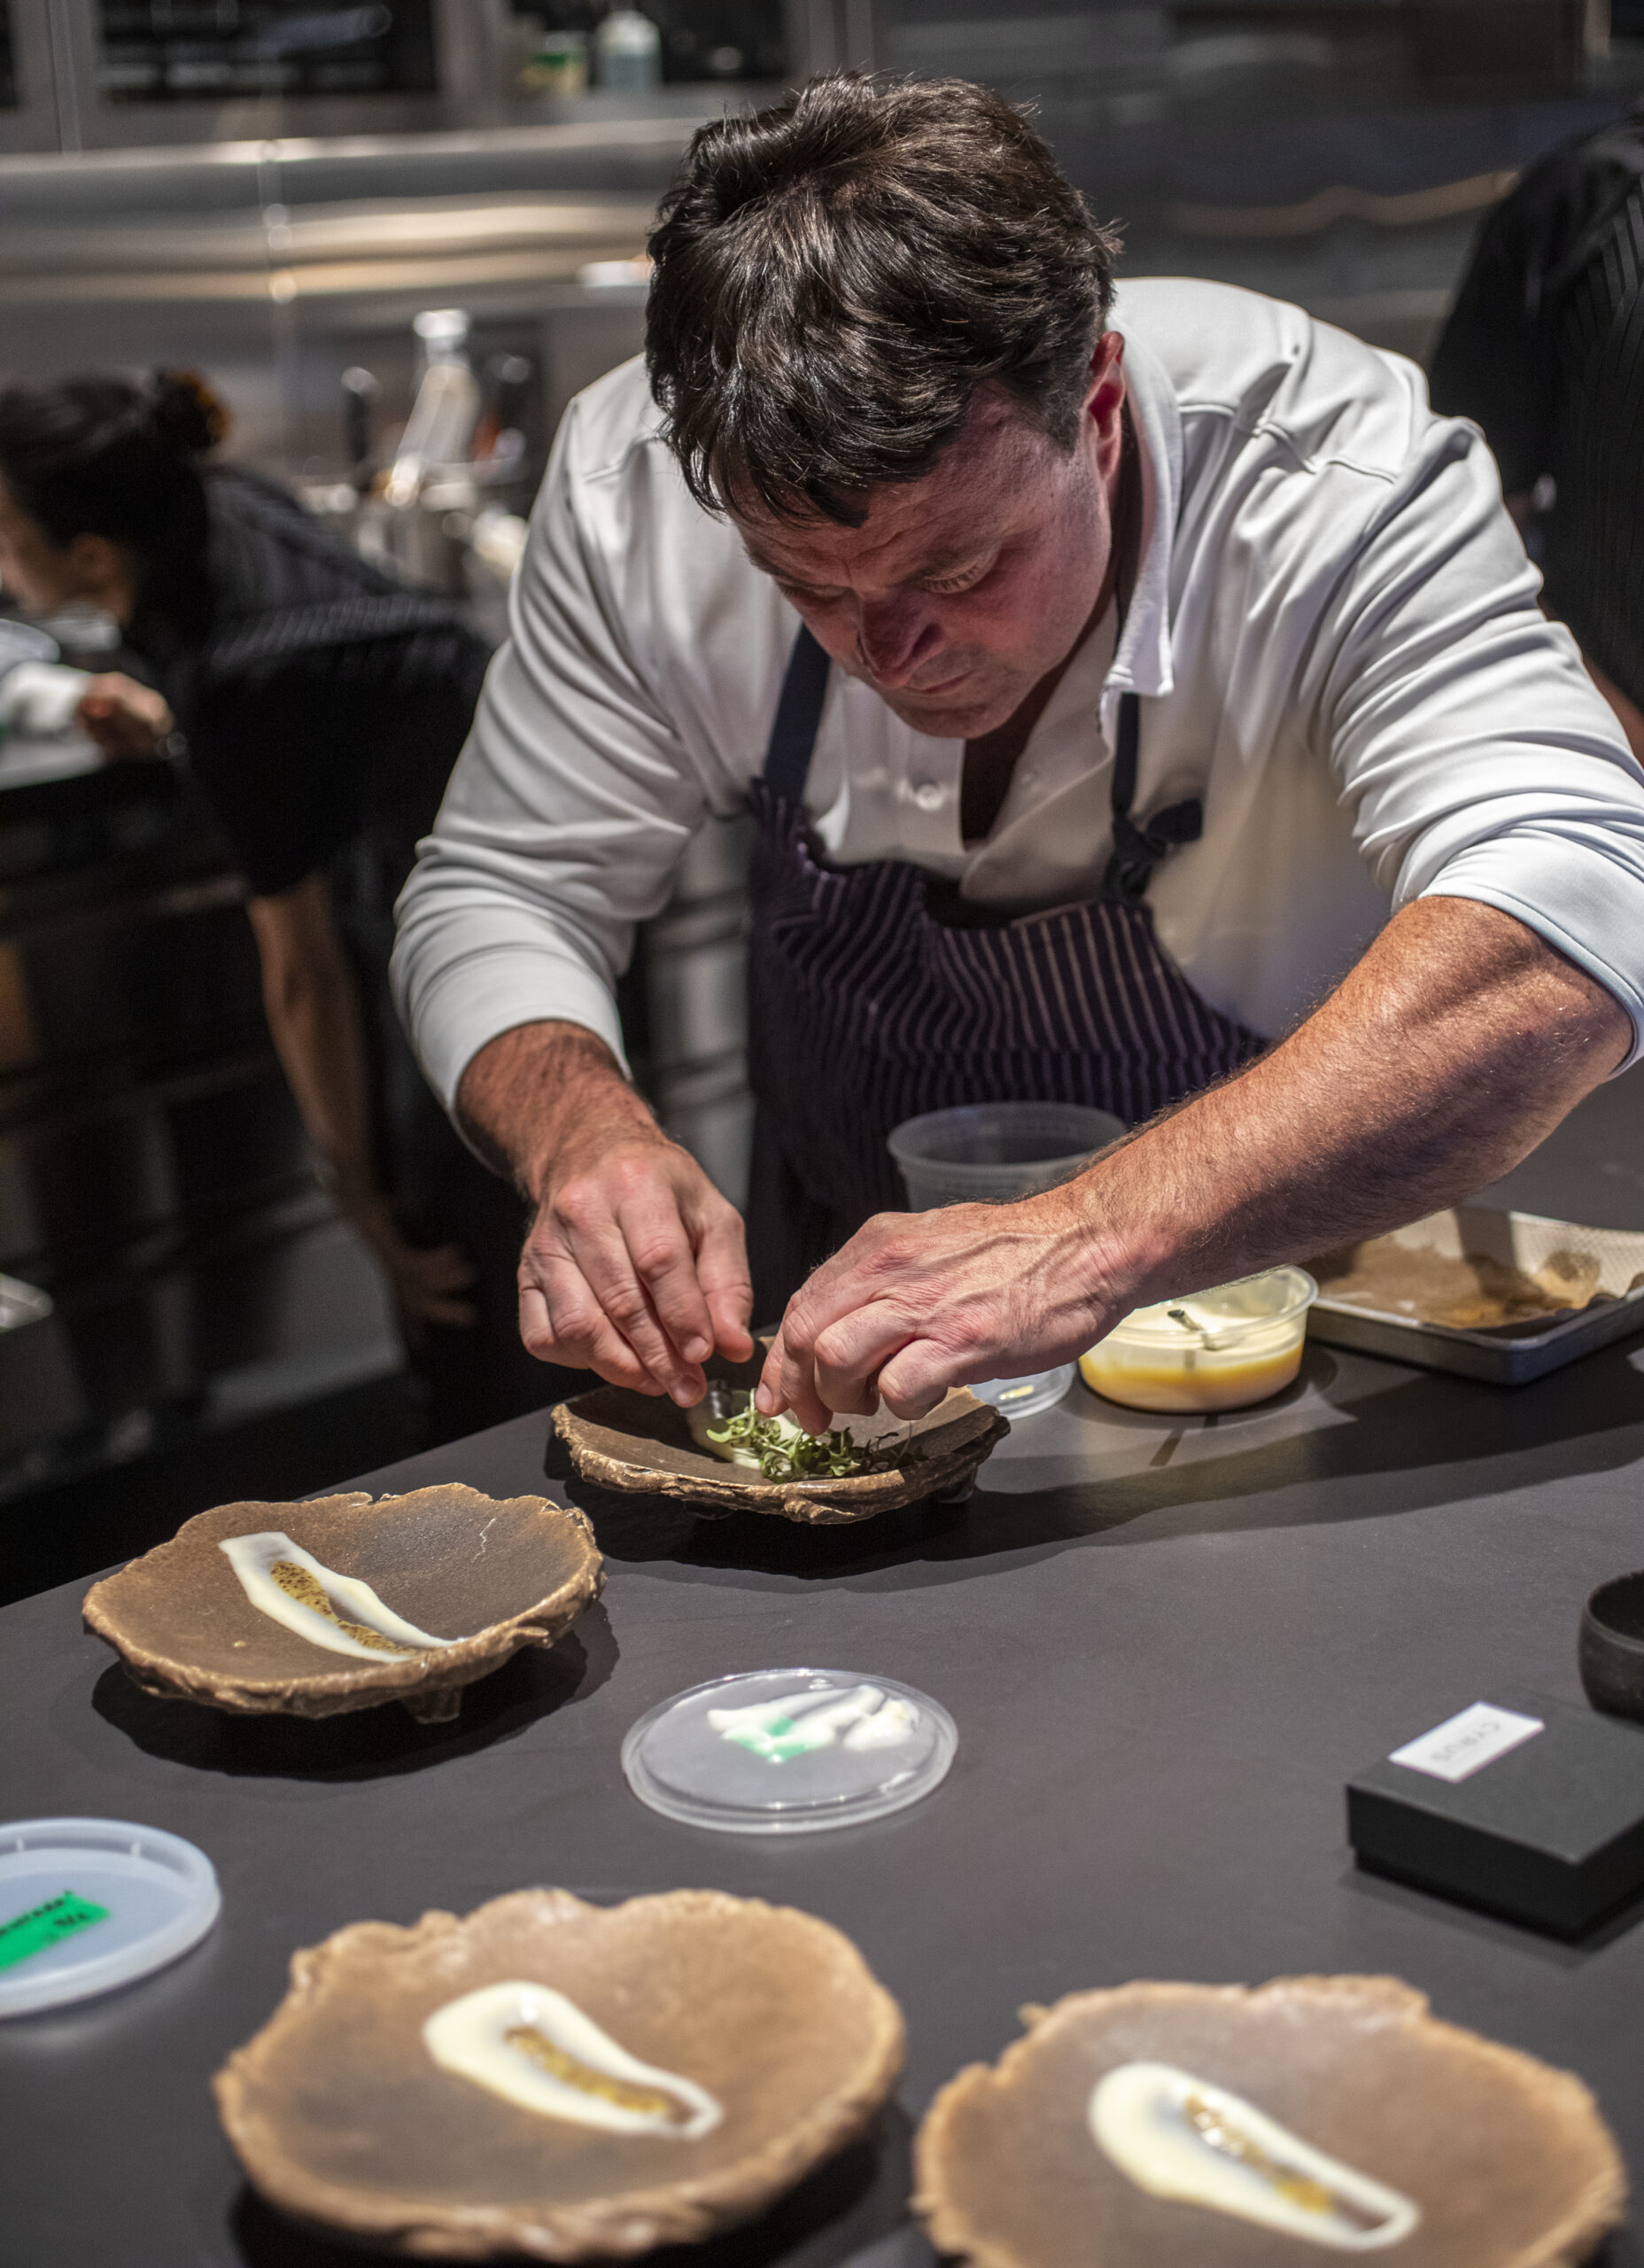 During a family and friends pre-opening aged gouda, pear, pretzel and mustard are plated for service by Chef Doug Keane at Cyrus in Geyserville on Thursday September 8, 2022. (Chad Surmick / Press Democrat)